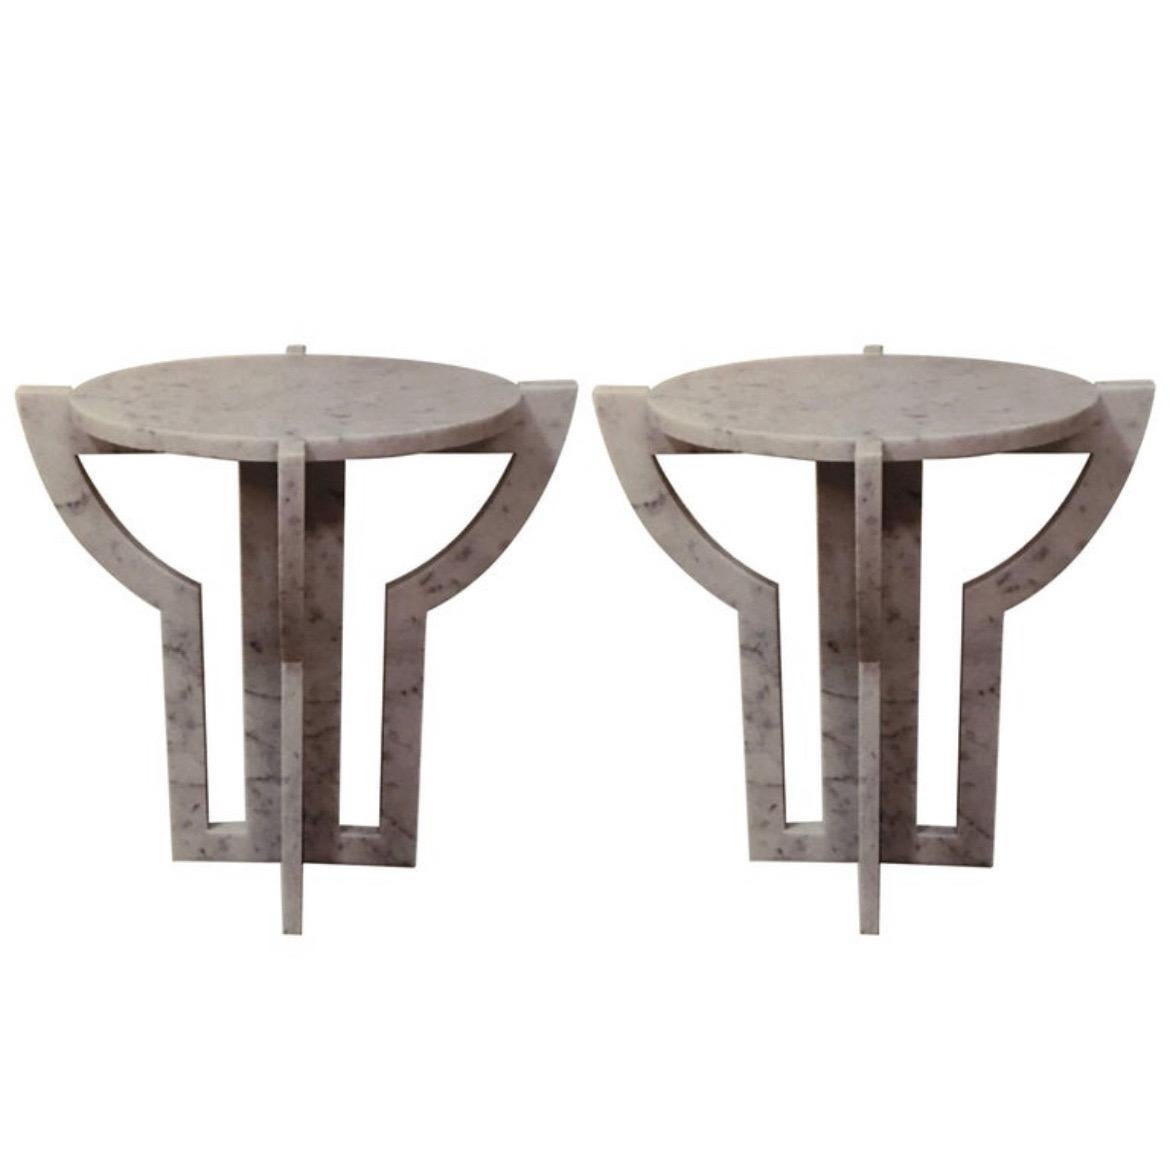 Hand-Crafted Italian Modern White Carrara Marble Side Tables, 